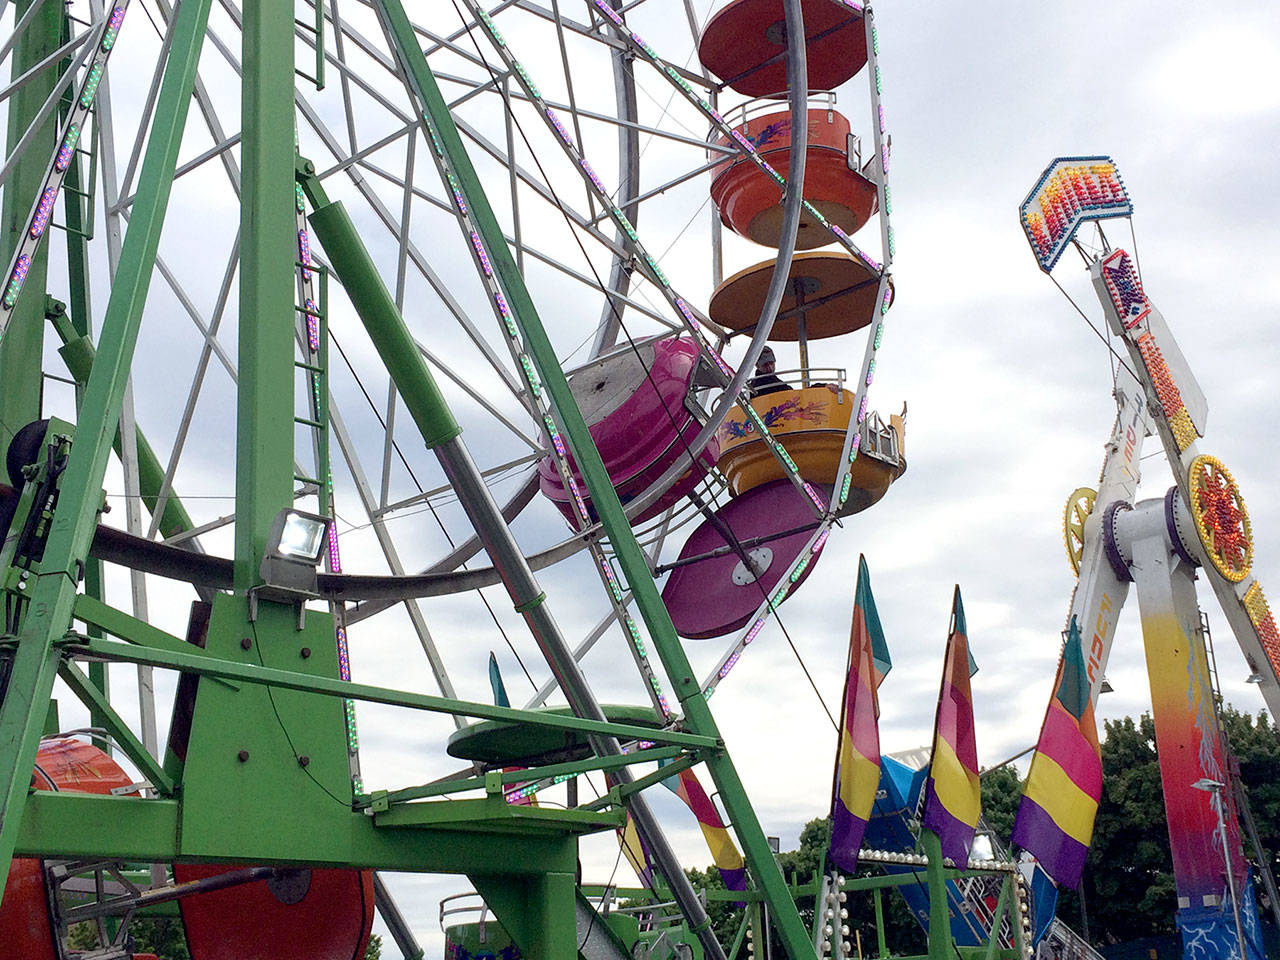 The Ferris wheel that was shut down at this year’s Rhododendron Festival after three people fell from one of the gondolas is seen shortly after the fall. (Port Townsend Police Department)